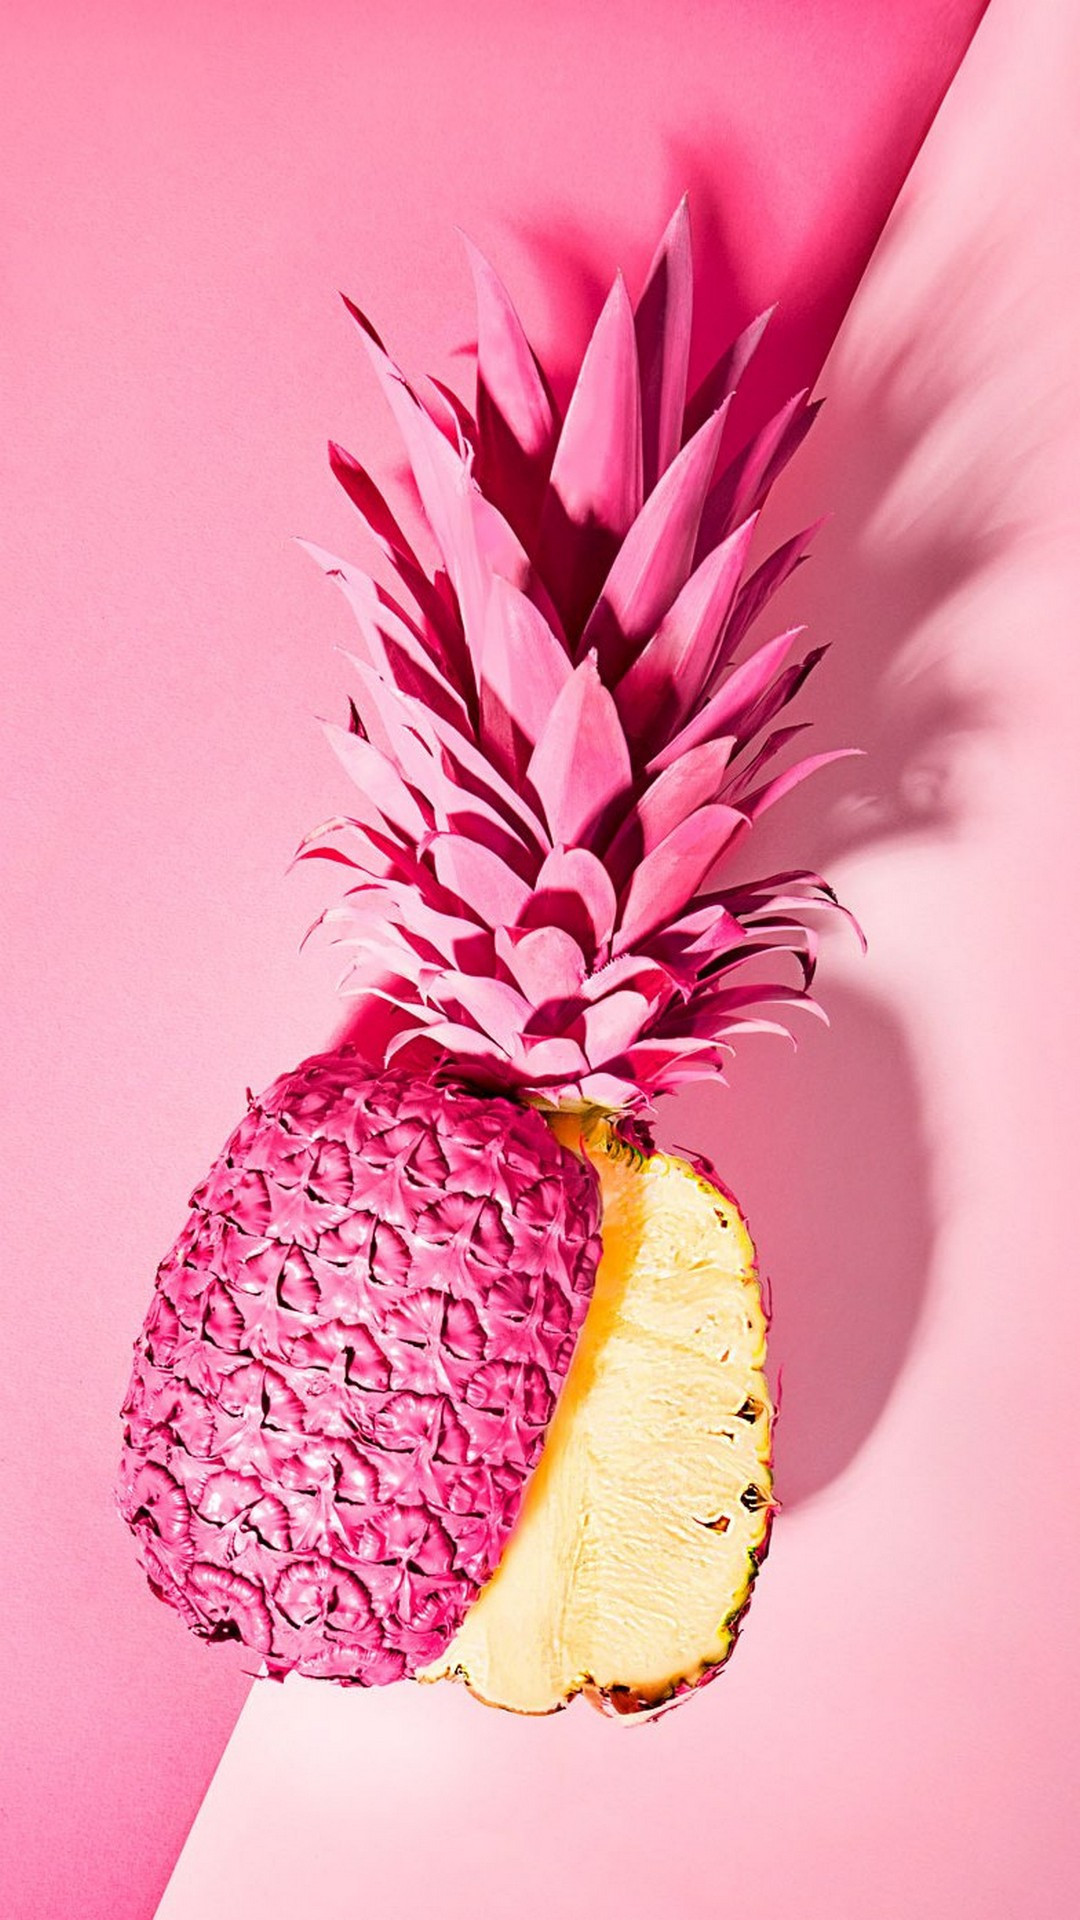 1080x1920 Pink and Gold Pineapple Wallpaper Awesome Rose Gold Pineapple Wallpaper  Cute Wallpapers T